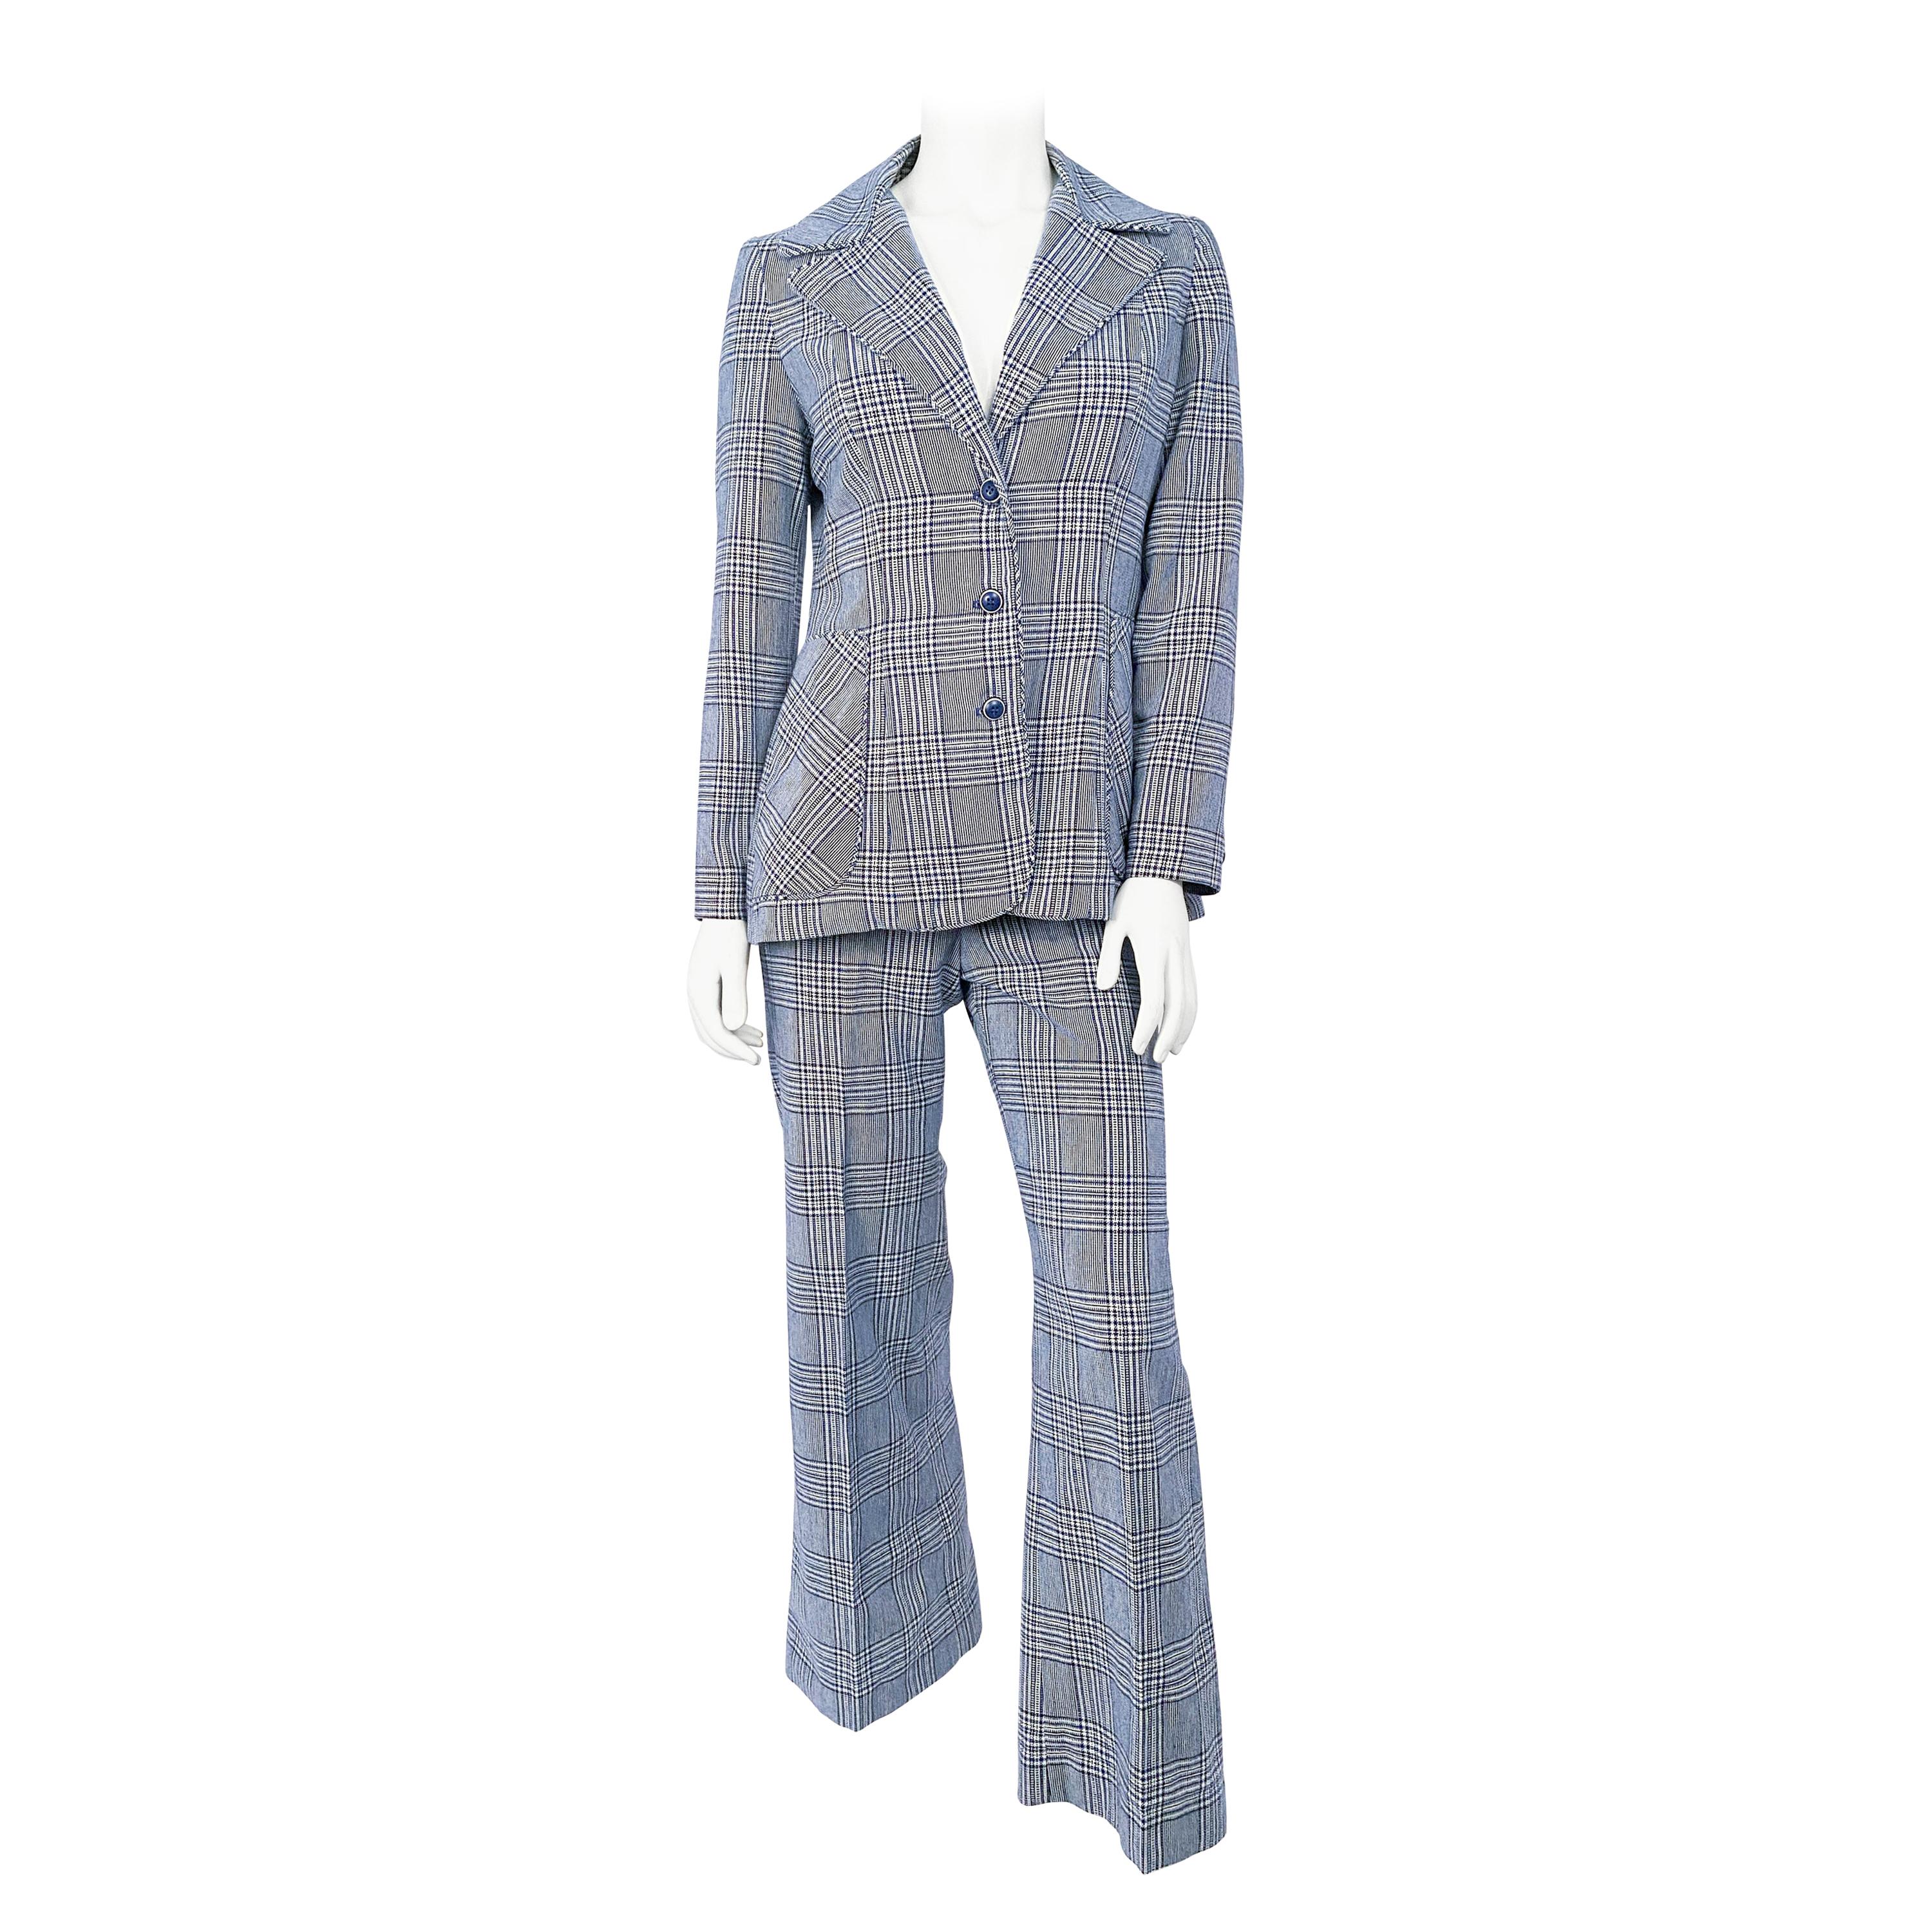 1970s Navy and White Plaid Mod Pant Suit